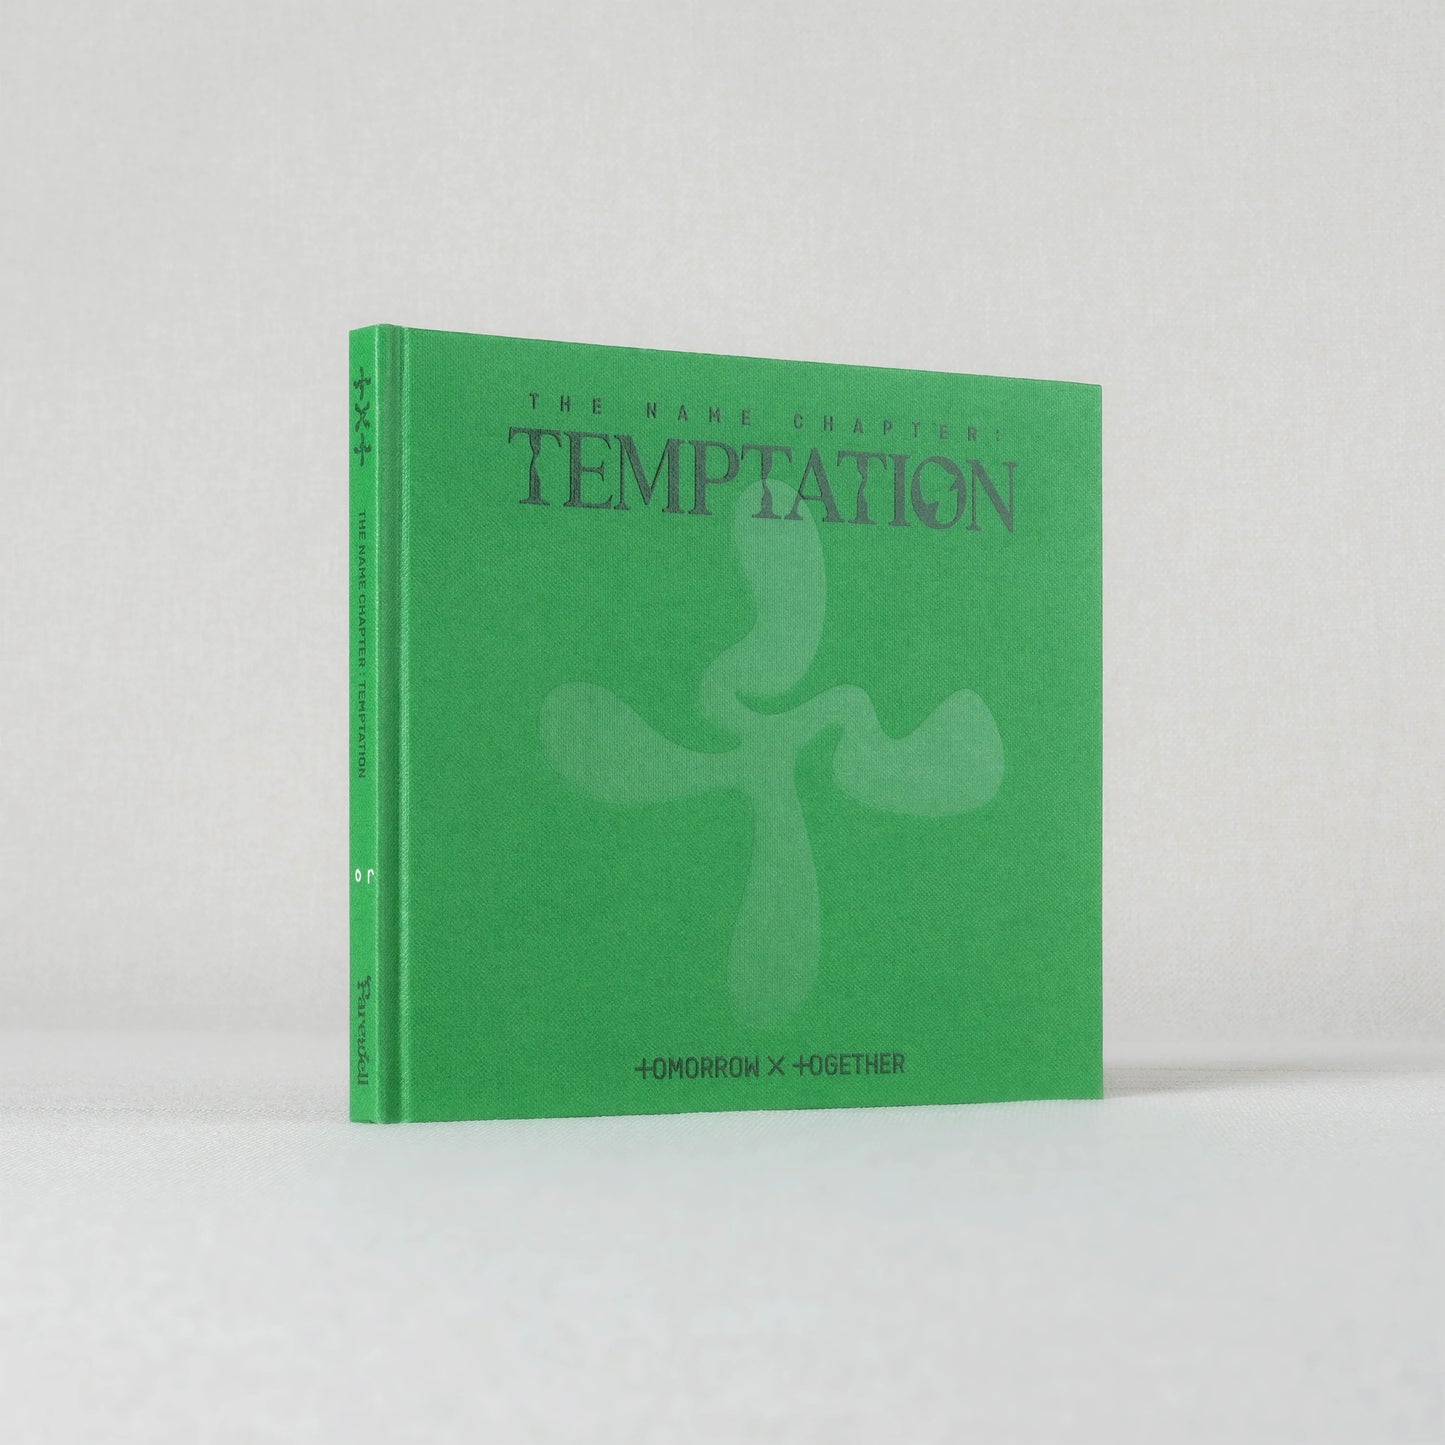 TXT - THE NAME CHAPTER: TEMPTATION